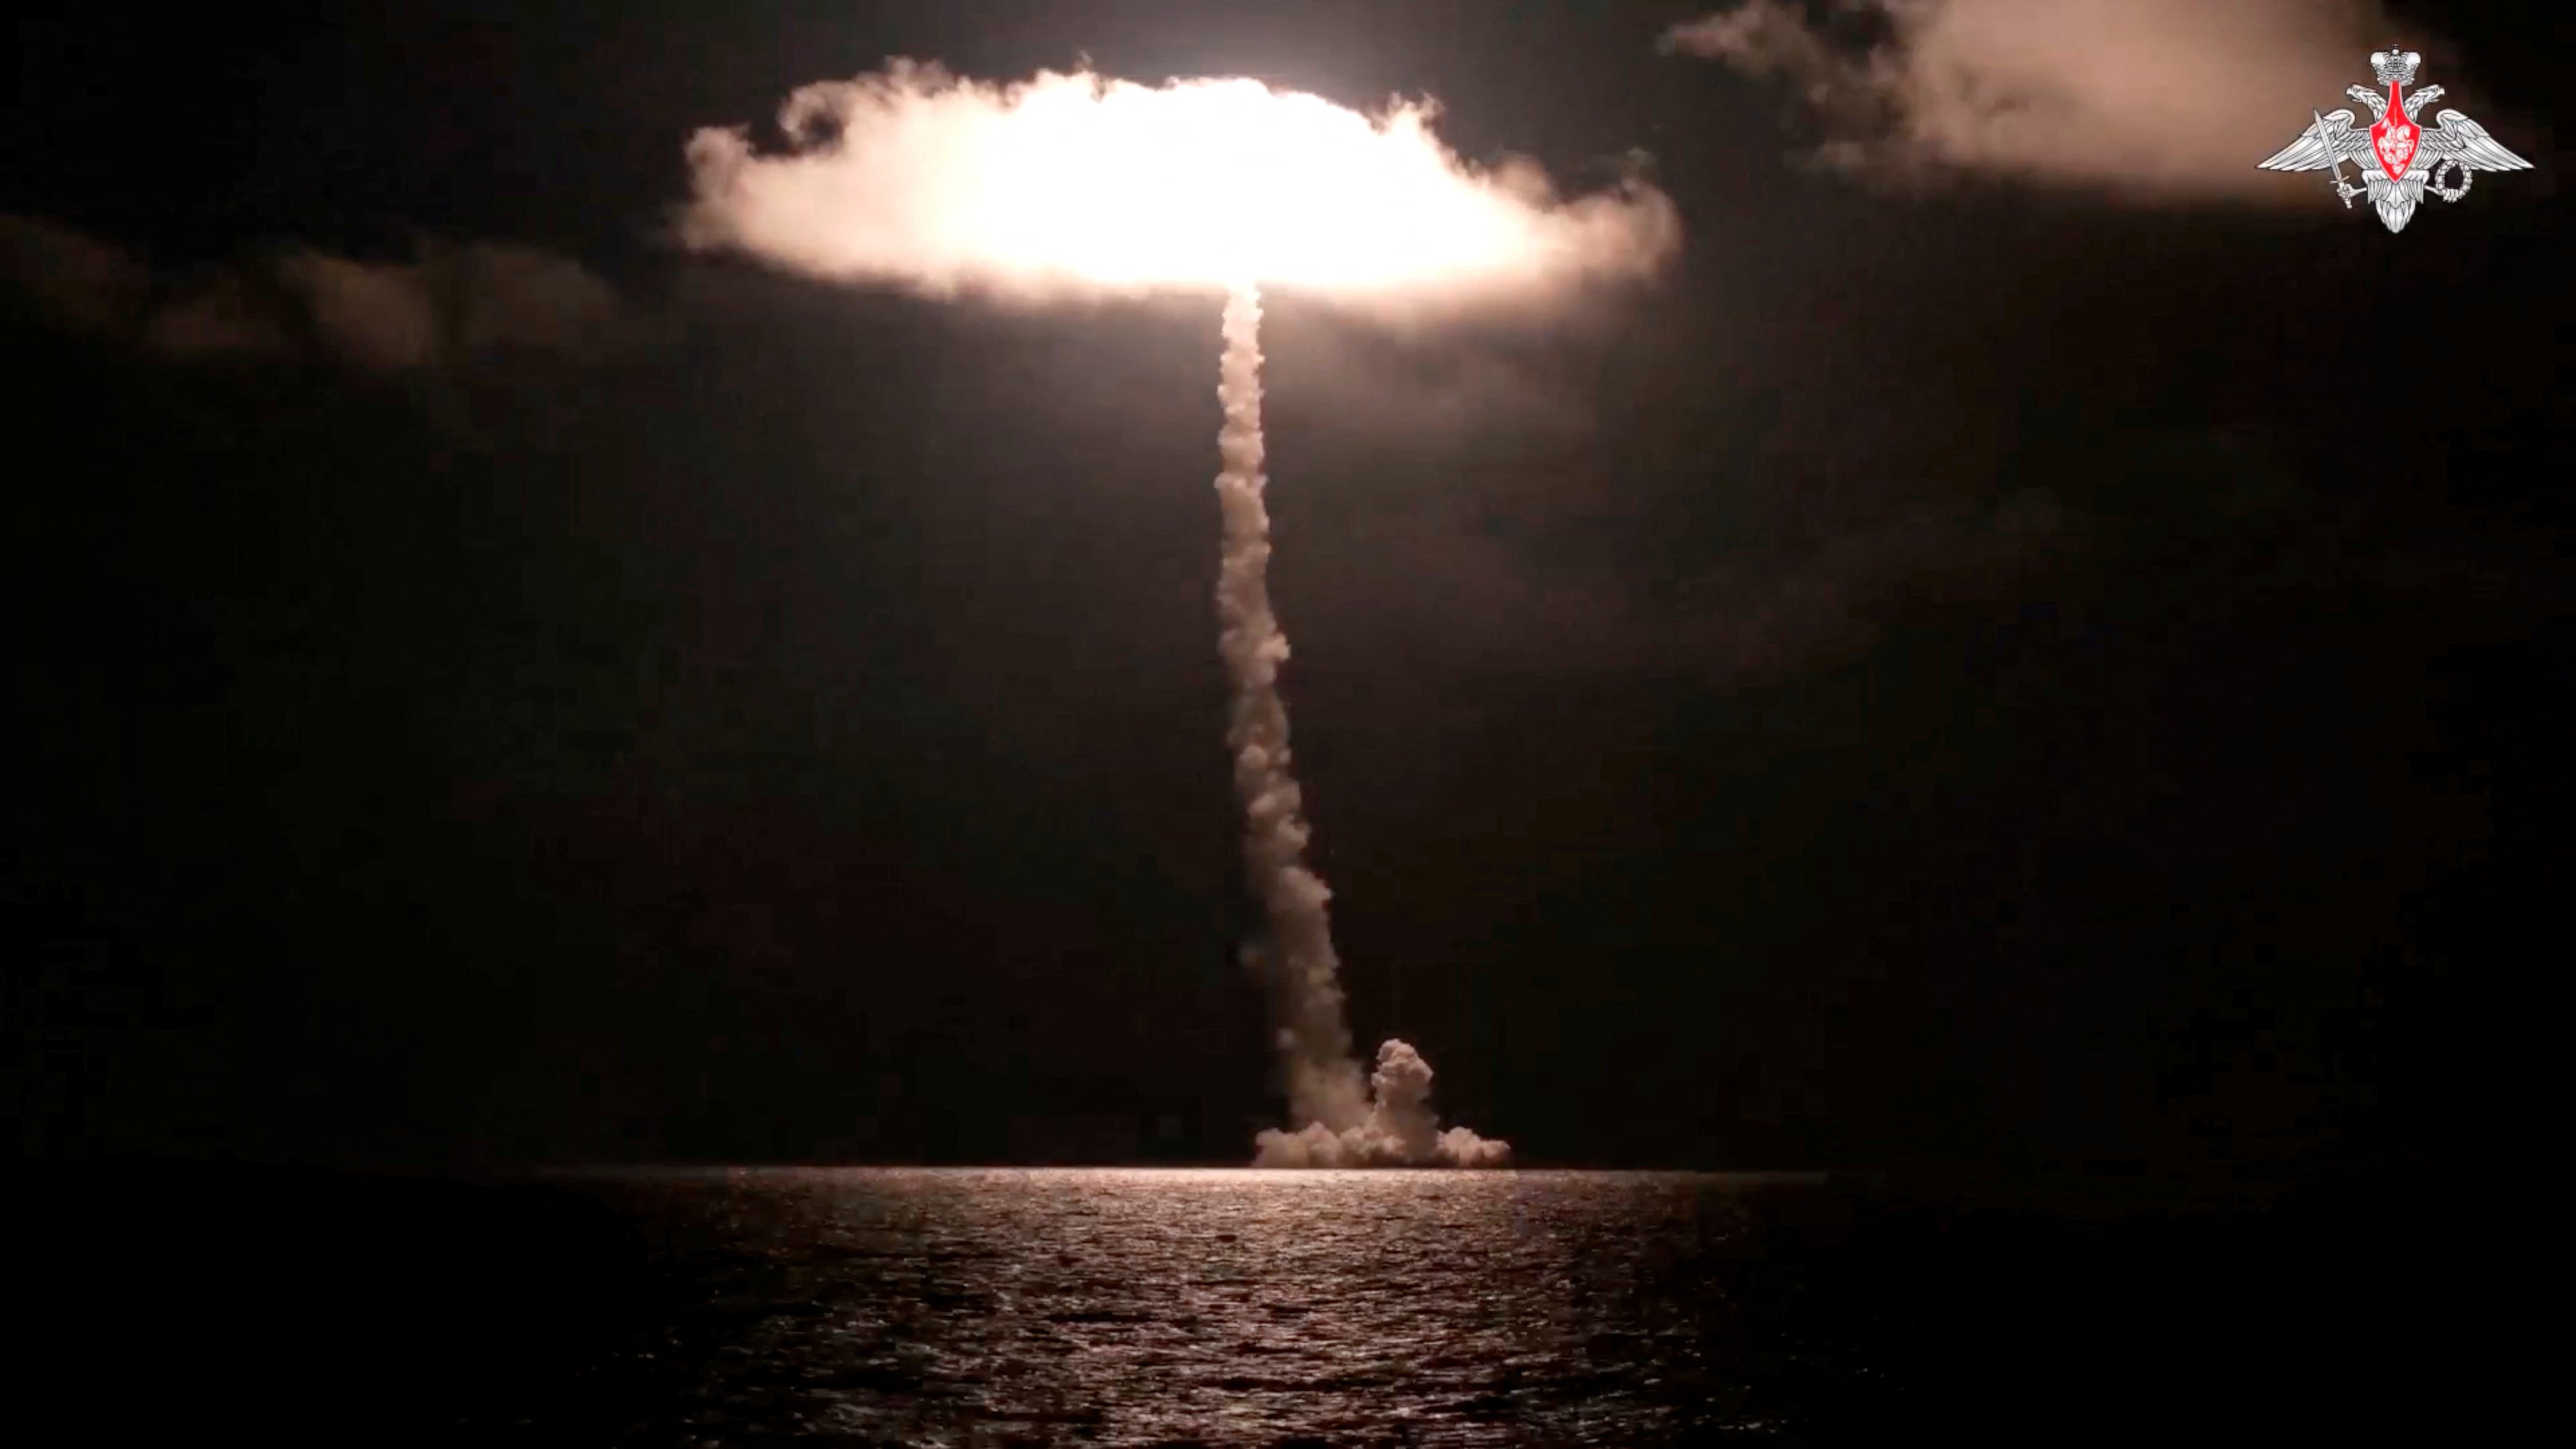 Russia’s new nuclear-powered submarine Imperator Alexander III test launches the Bulava ballistic missile, designed to carry nuclear warheads, from the White Sea, in this image taken from video released on Sunday. Photo: Russian Defence Ministry / Handout via Reuters